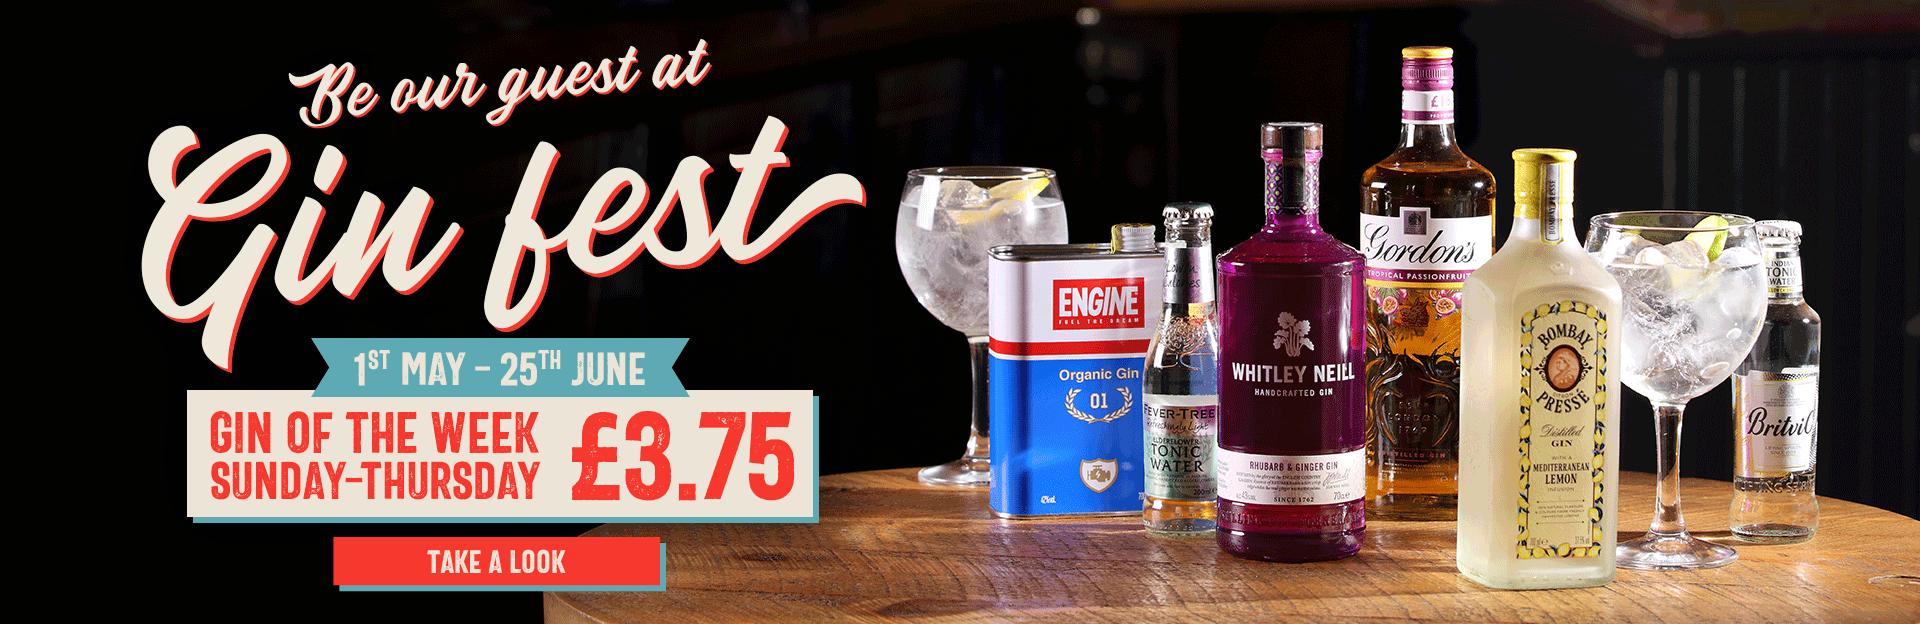 Gin Fest at O’Neill’s Enfield